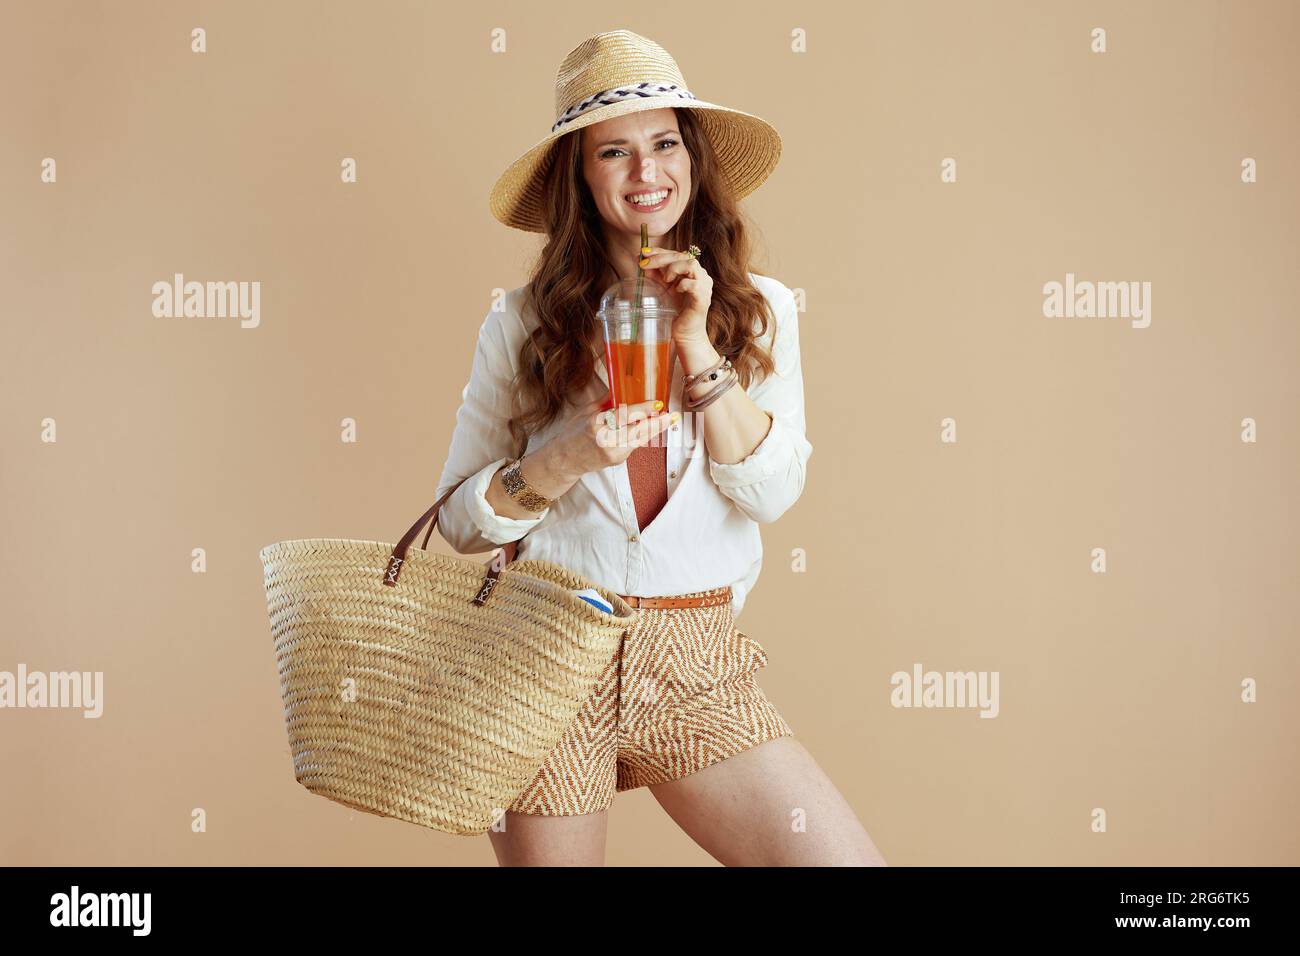 https://c8.alamy.com/comp/2RG6TK5/beach-vacation-happy-elegant-woman-in-white-blouse-and-shorts-isolated-on-beige-background-with-straw-bag-carrot-juice-and-summer-hat-2RG6TK5.jpg